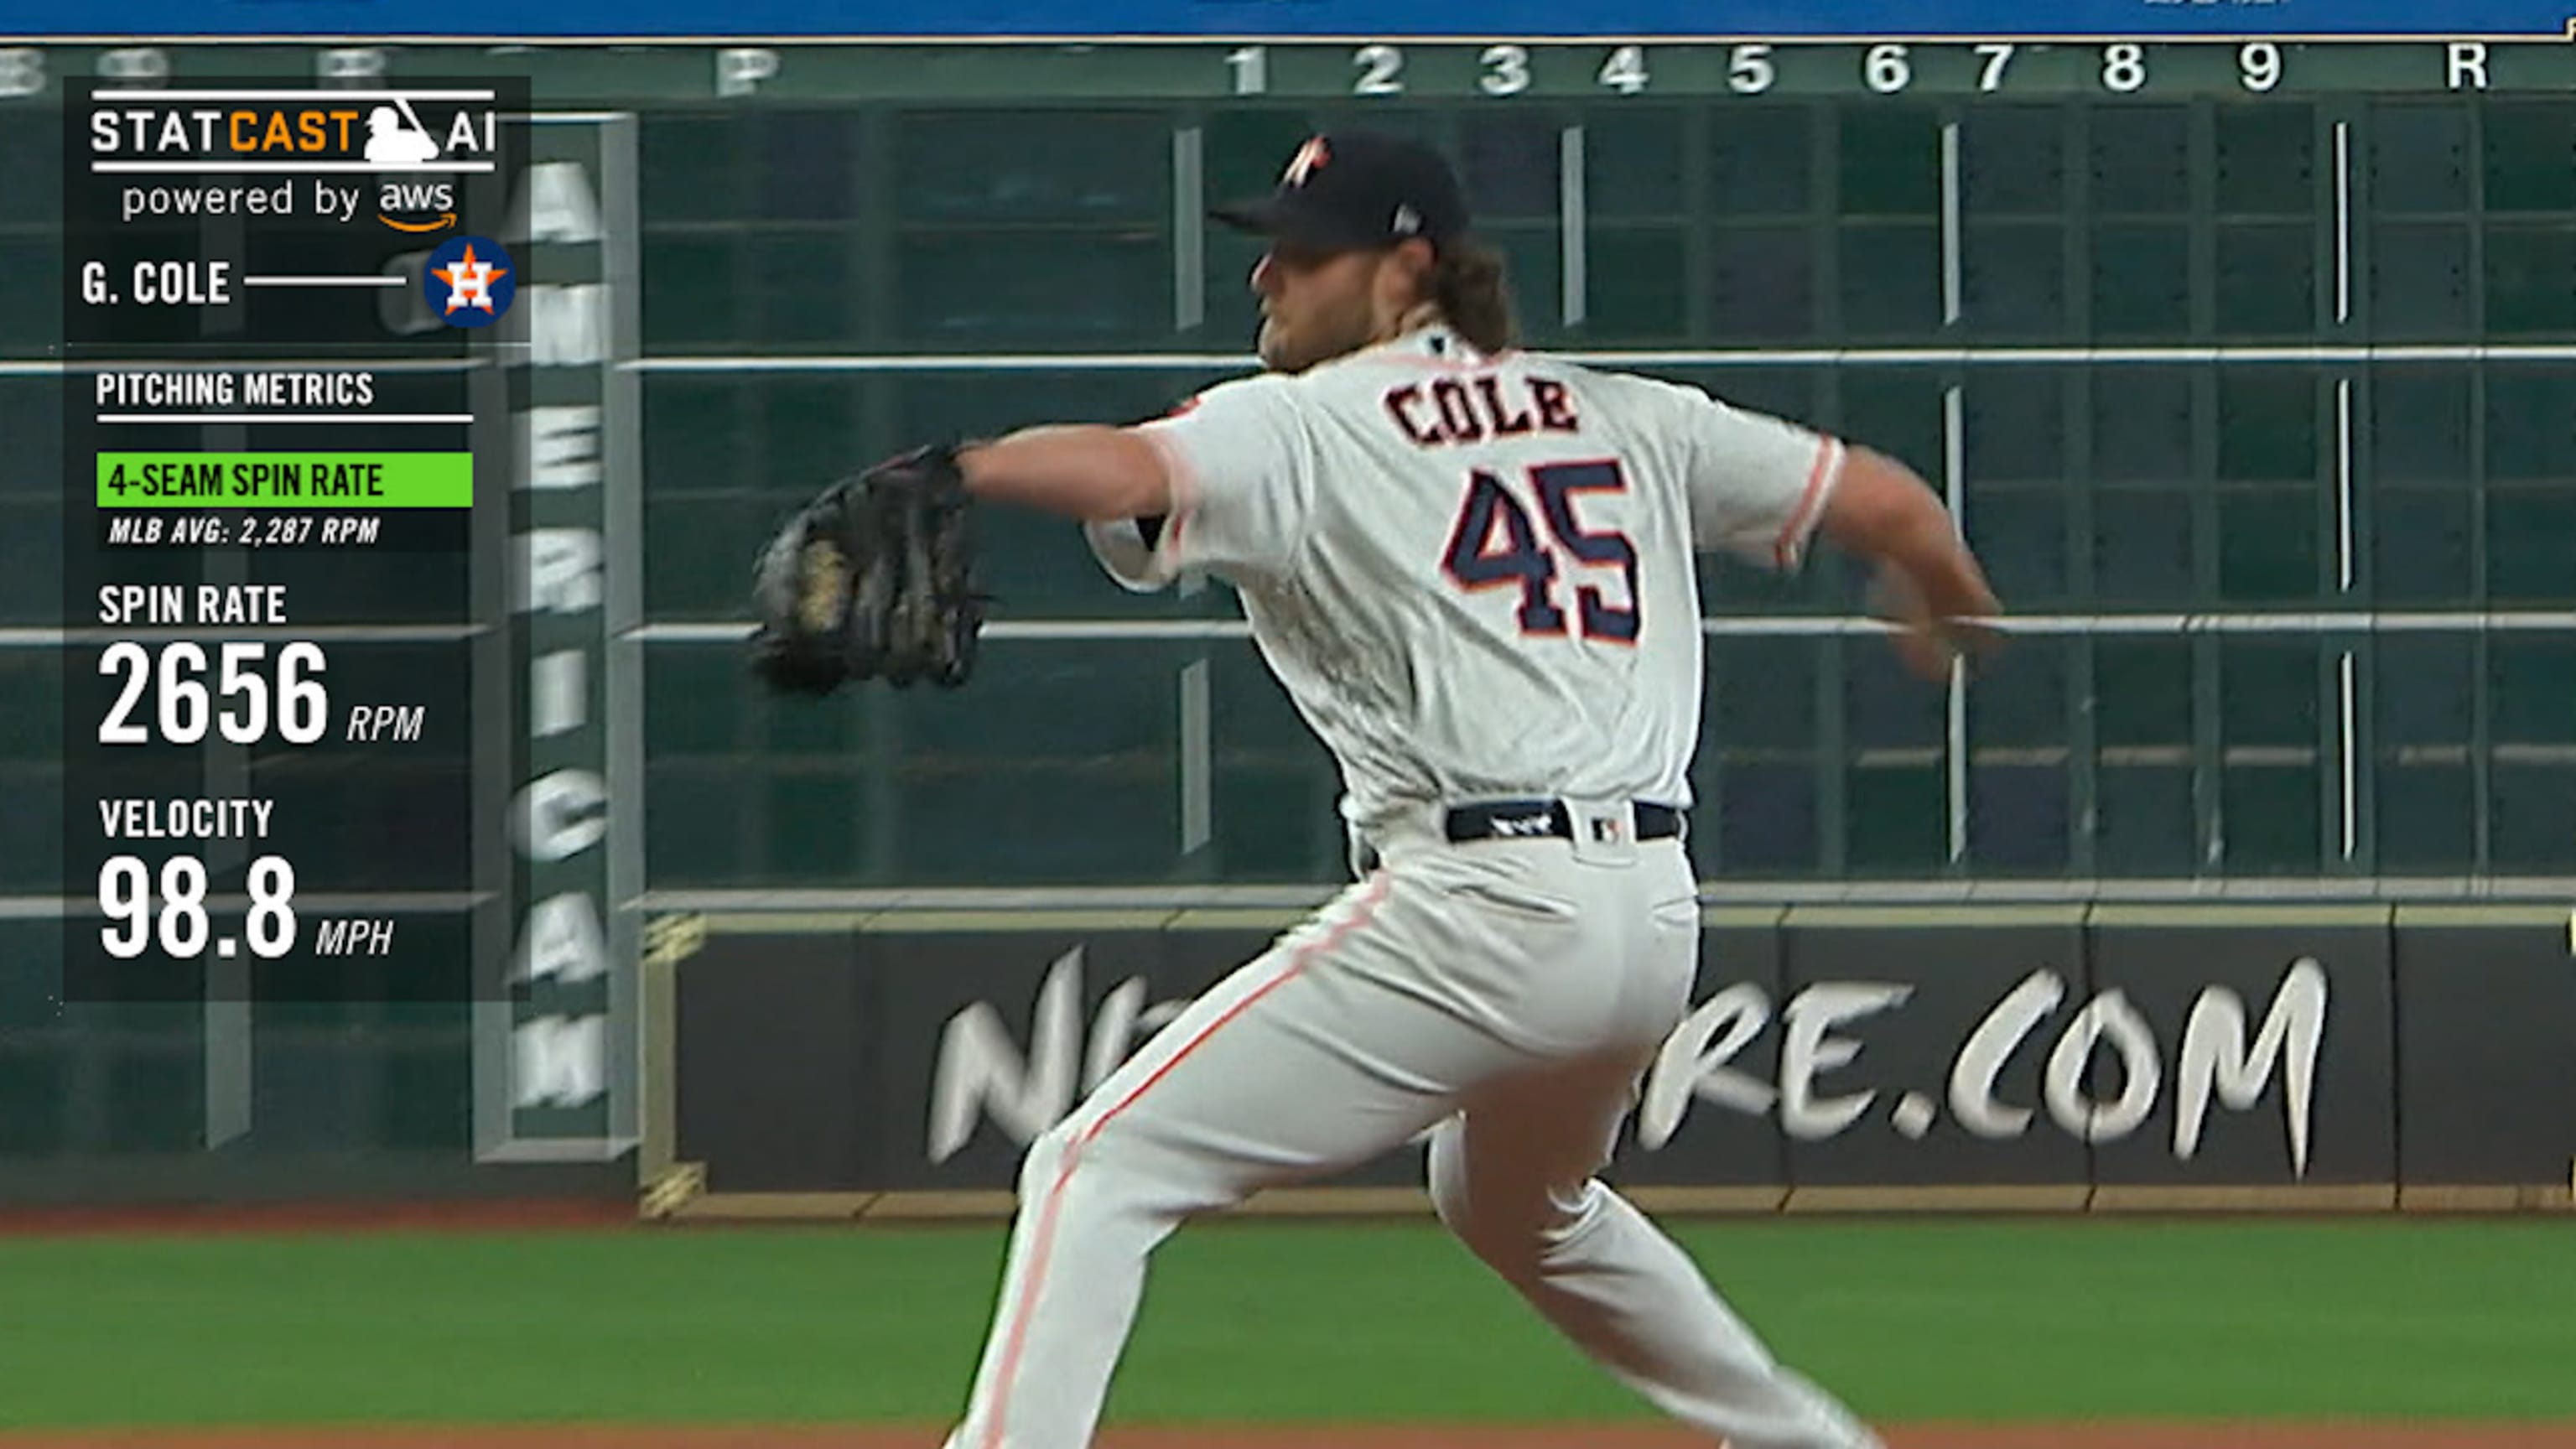 Gerrit Cole Ranked 2nd on MLB Network's Top 10 Starting Pitchers